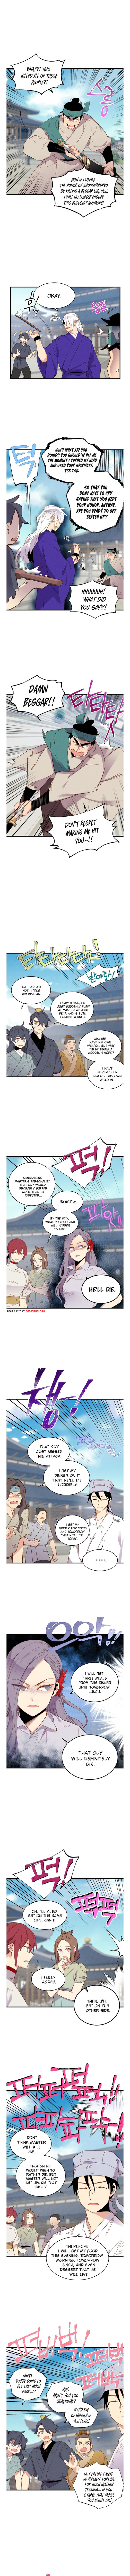 Lightning Degree - Chapter 53 Page 2